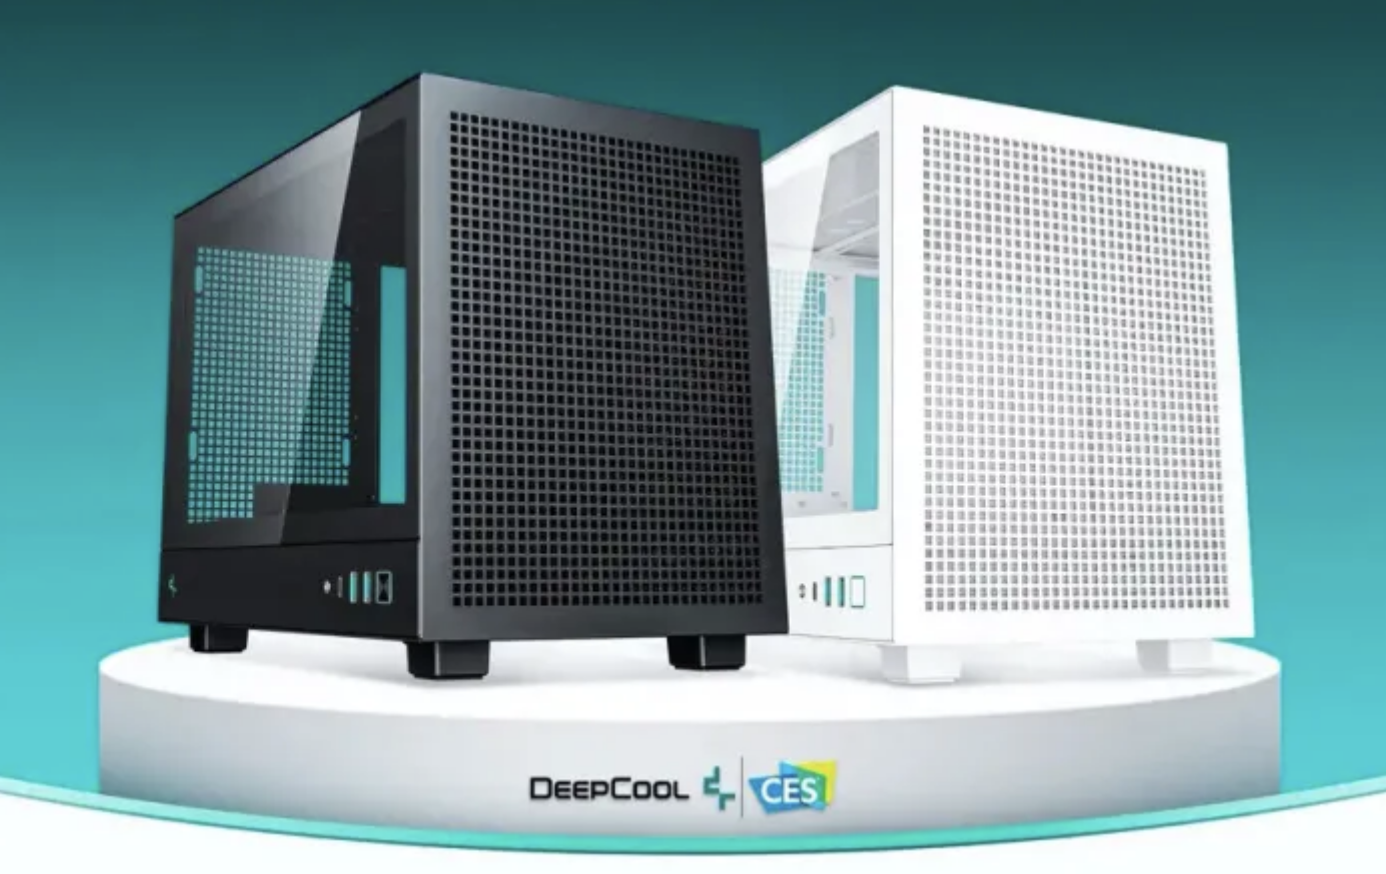 Two of Deeper Cool's new mini-ITX cases next to each other.